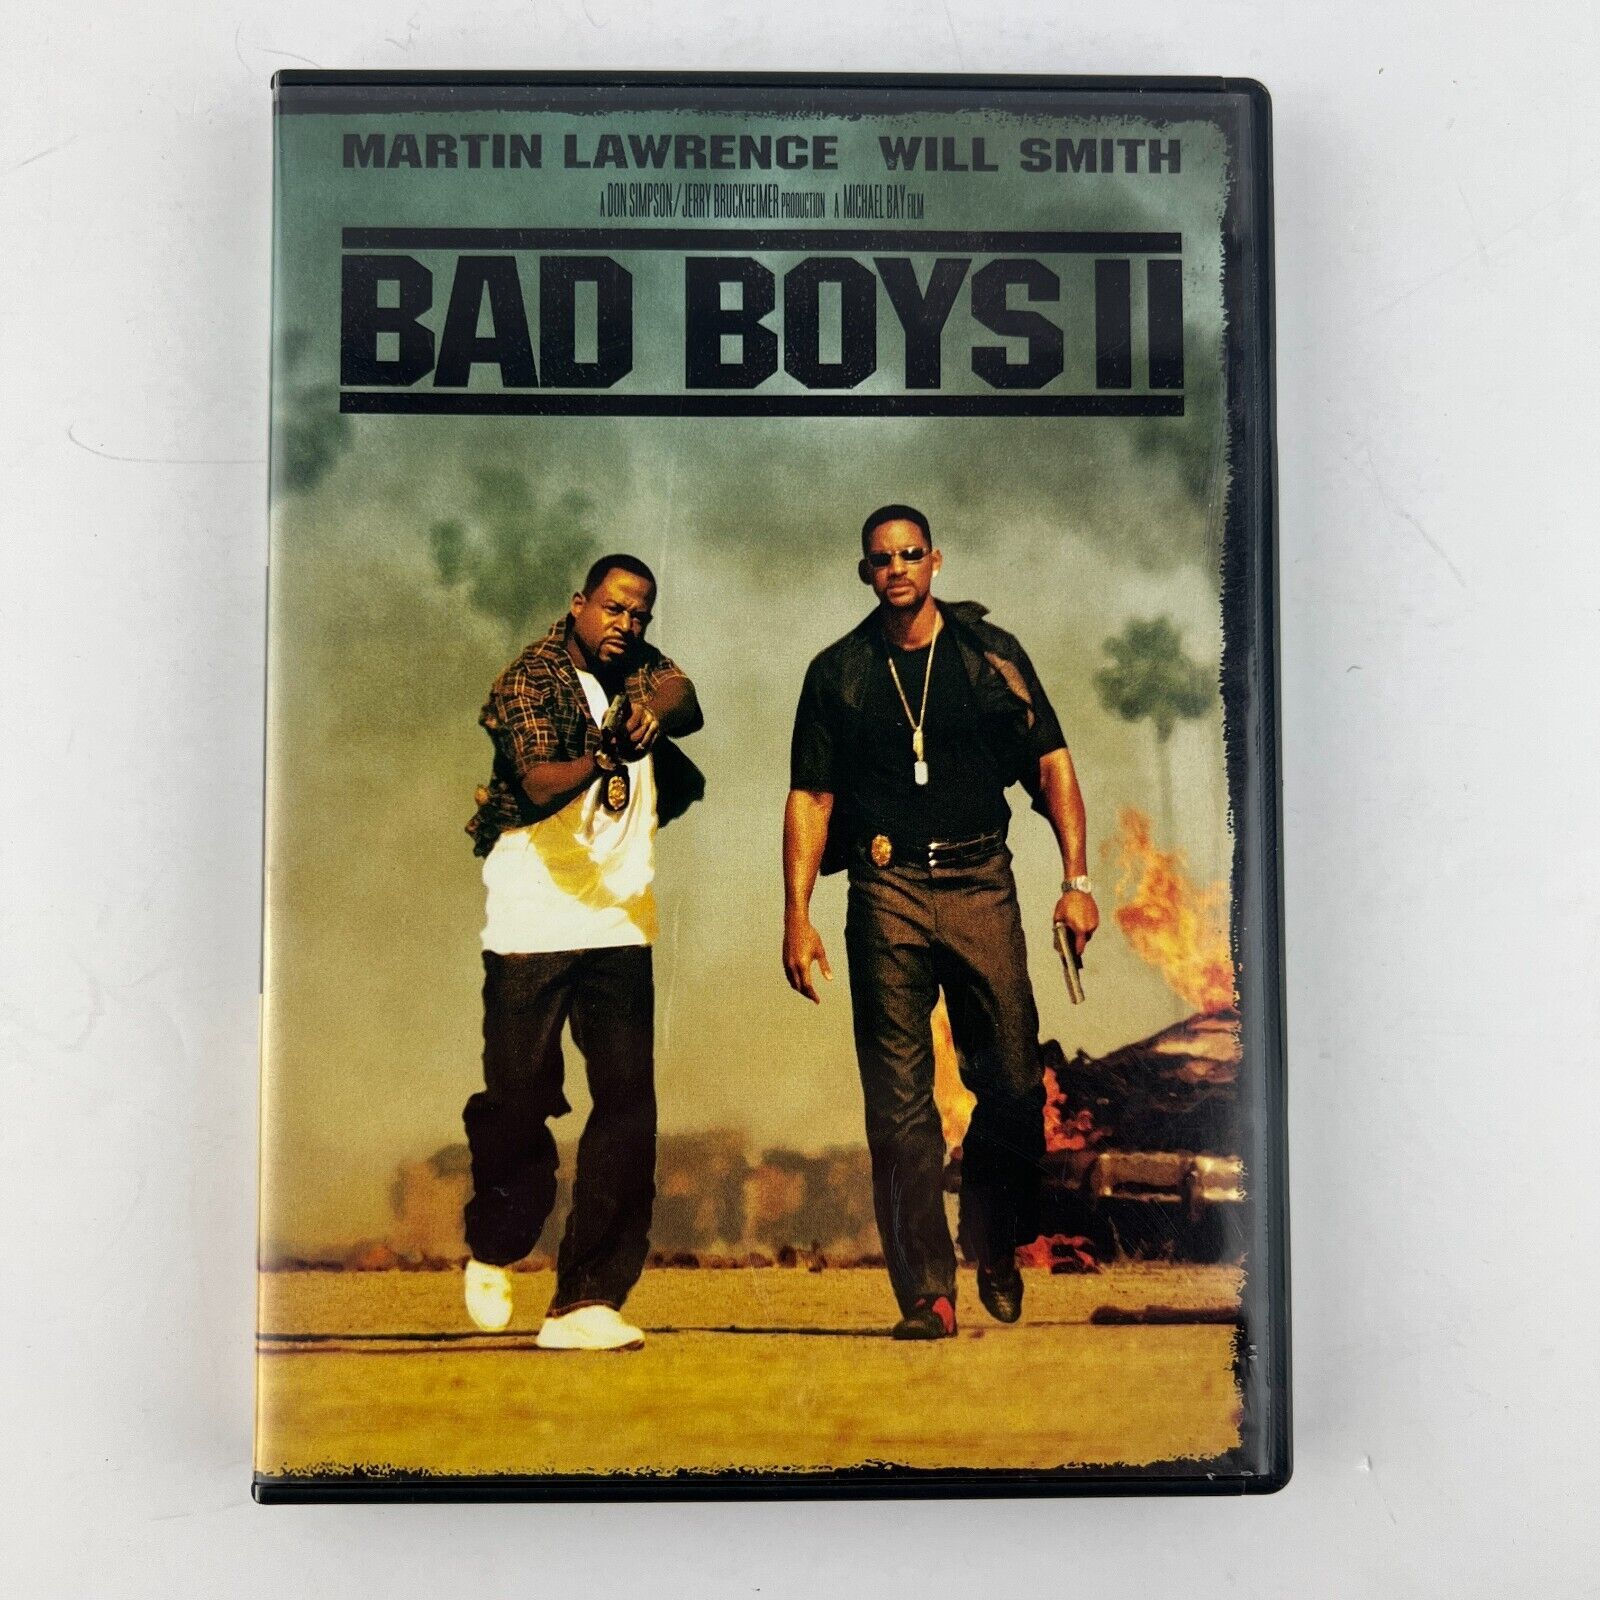 Primary image for Bad Boys II (Two-Disc Special Edition) DVD